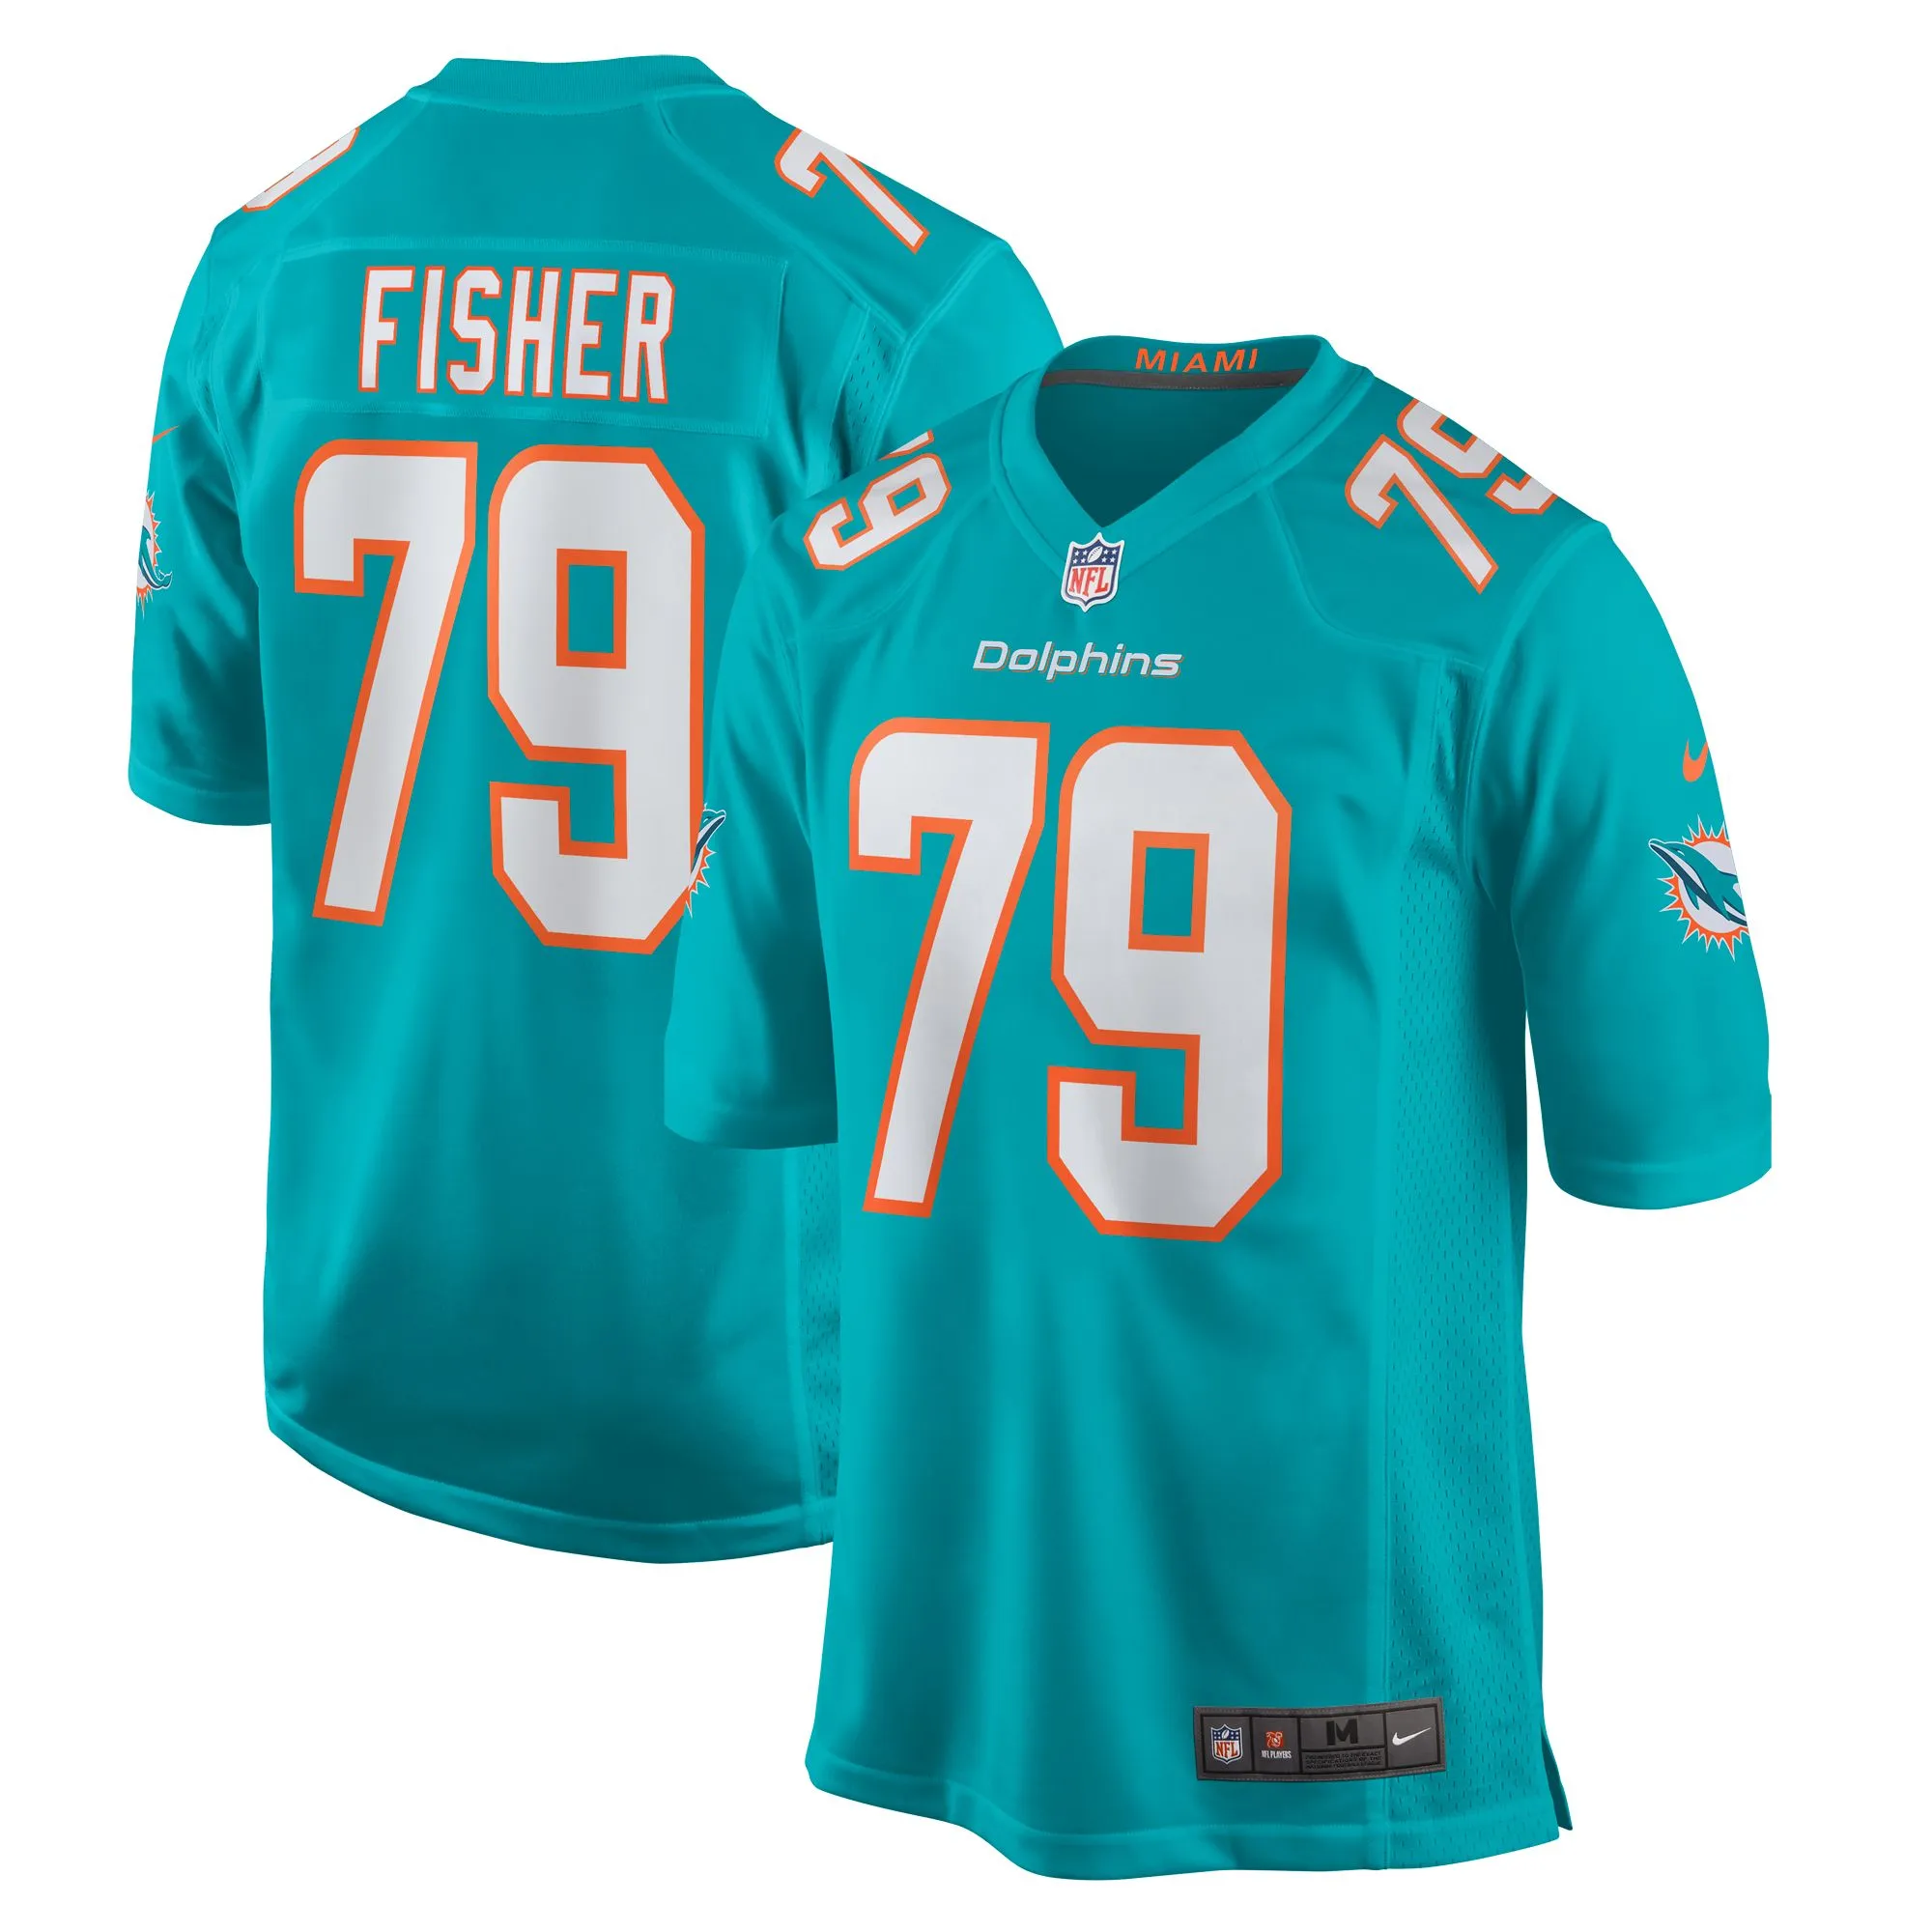 Eric Fisher Miami Dolphins  Home Game Player Jersey - Aqua